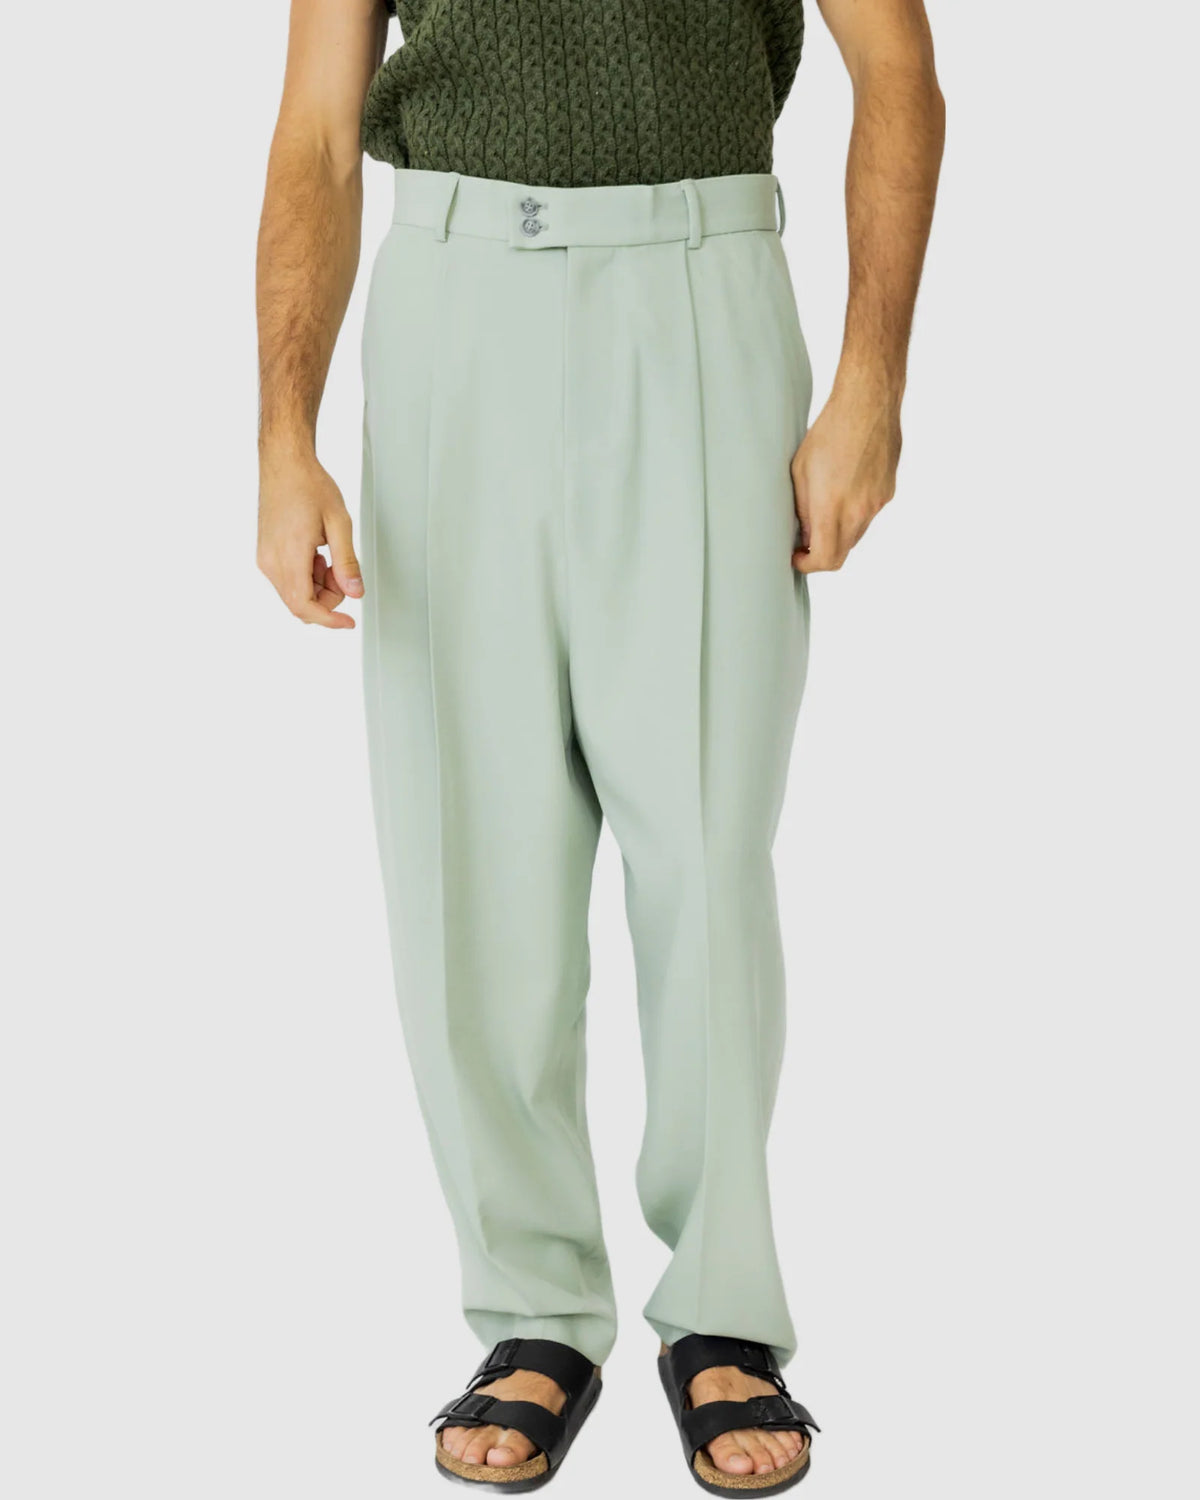 Justin Cassin August Loose Fit Trousers in Green Mist Color 